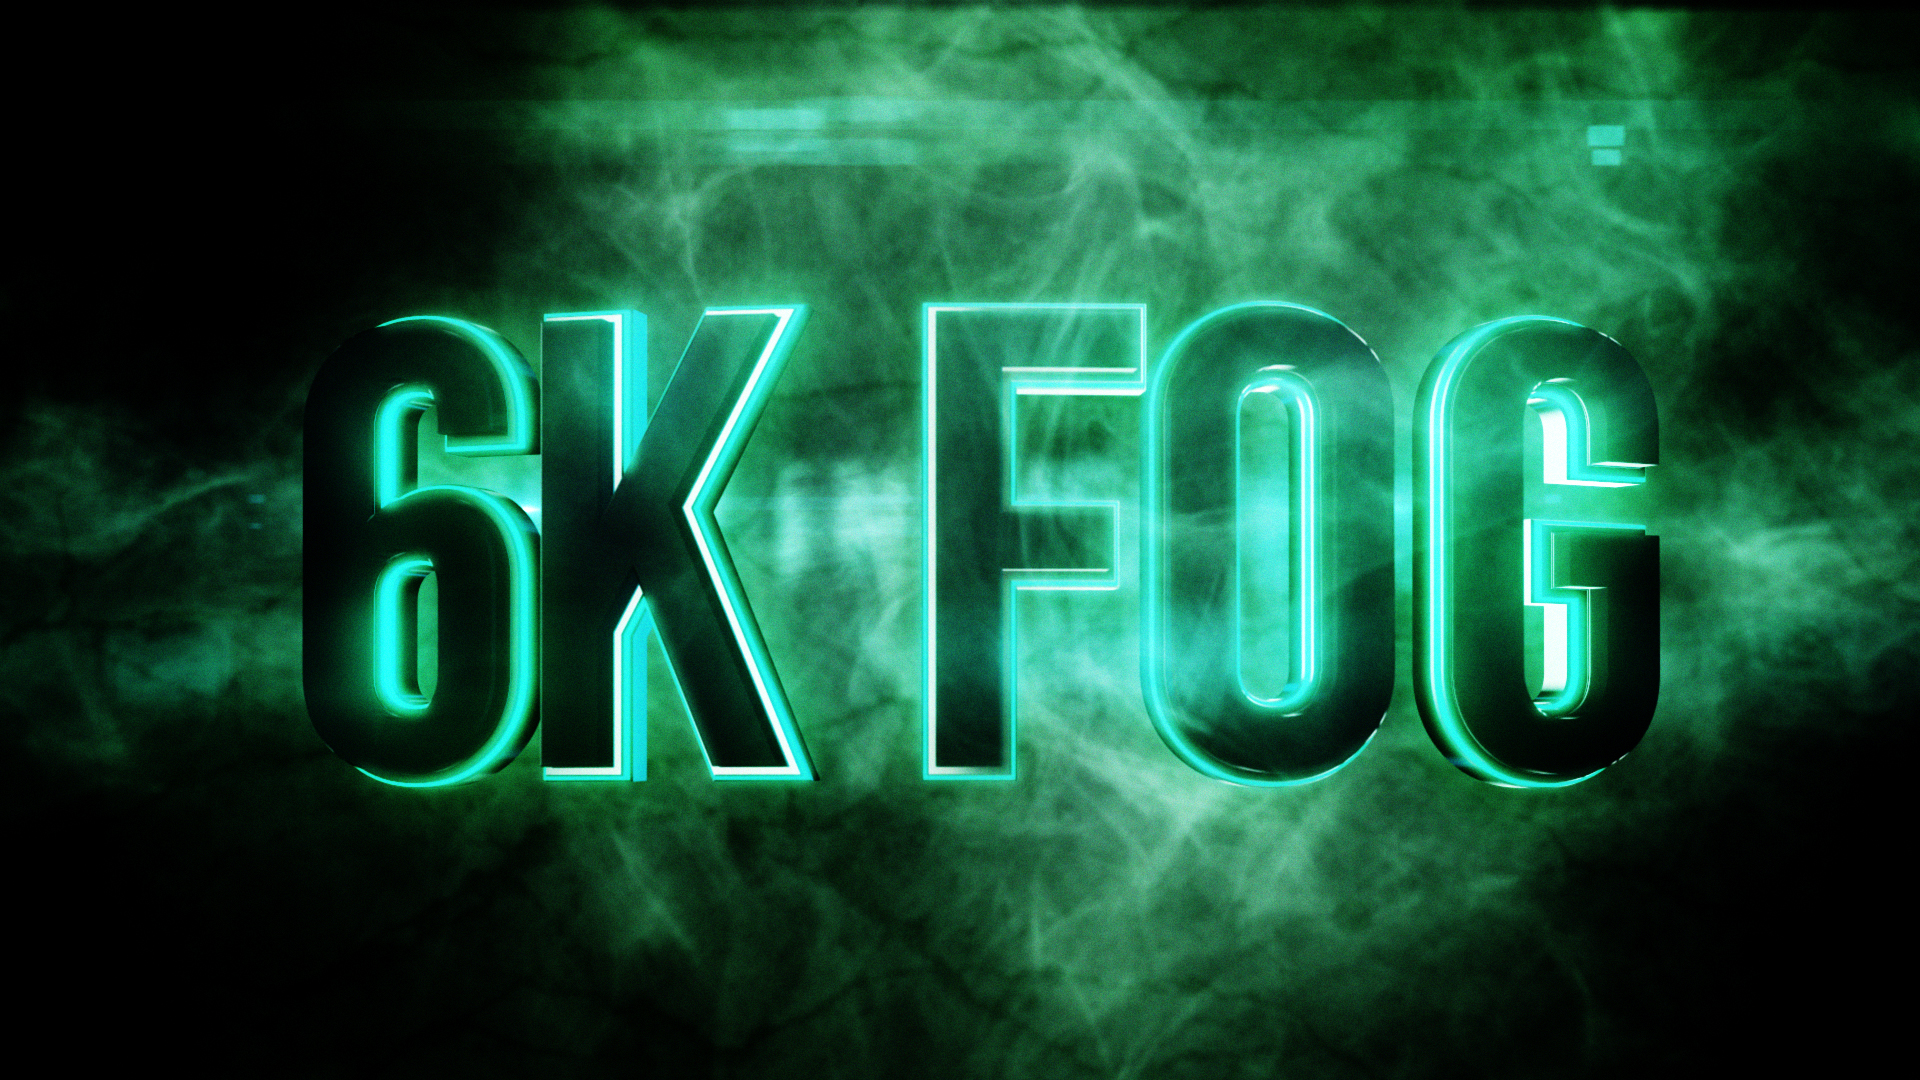 6K Fog Featured | Video Elements and Motion Design Assets by Film Bodega